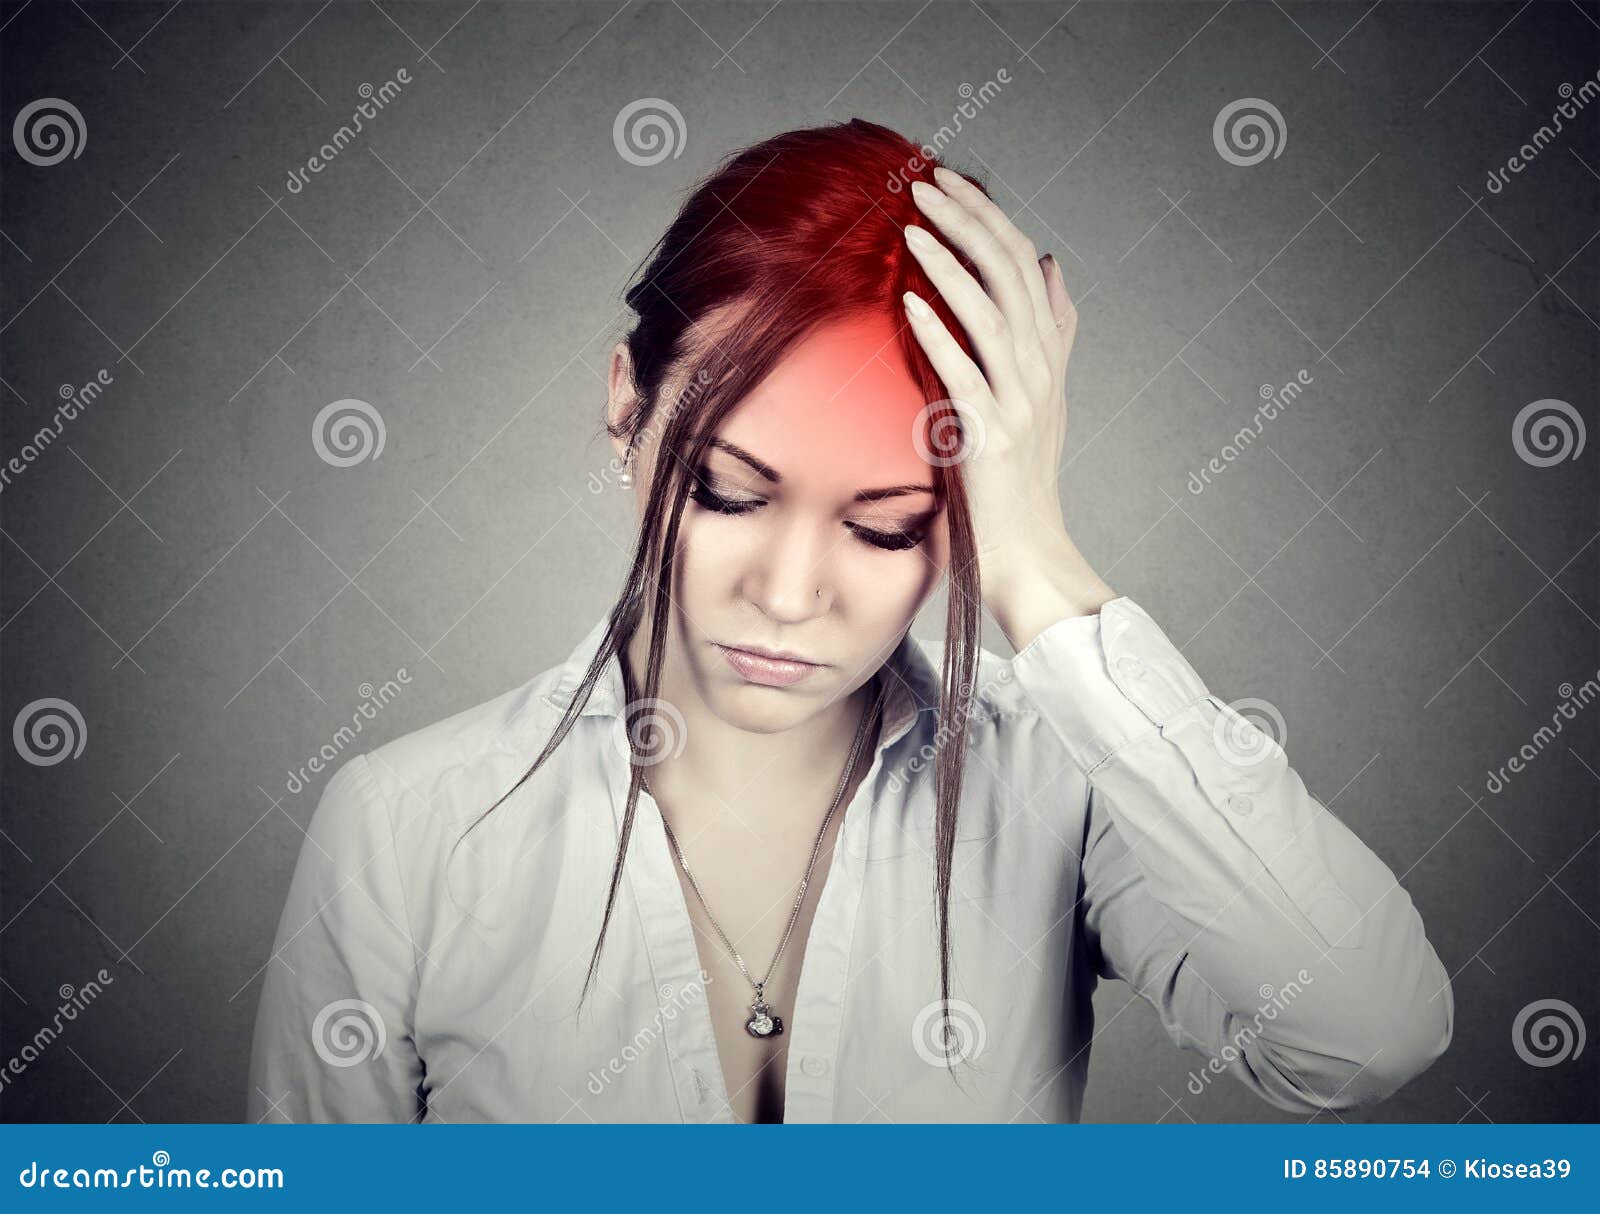 woman having a headache with her head in her hand